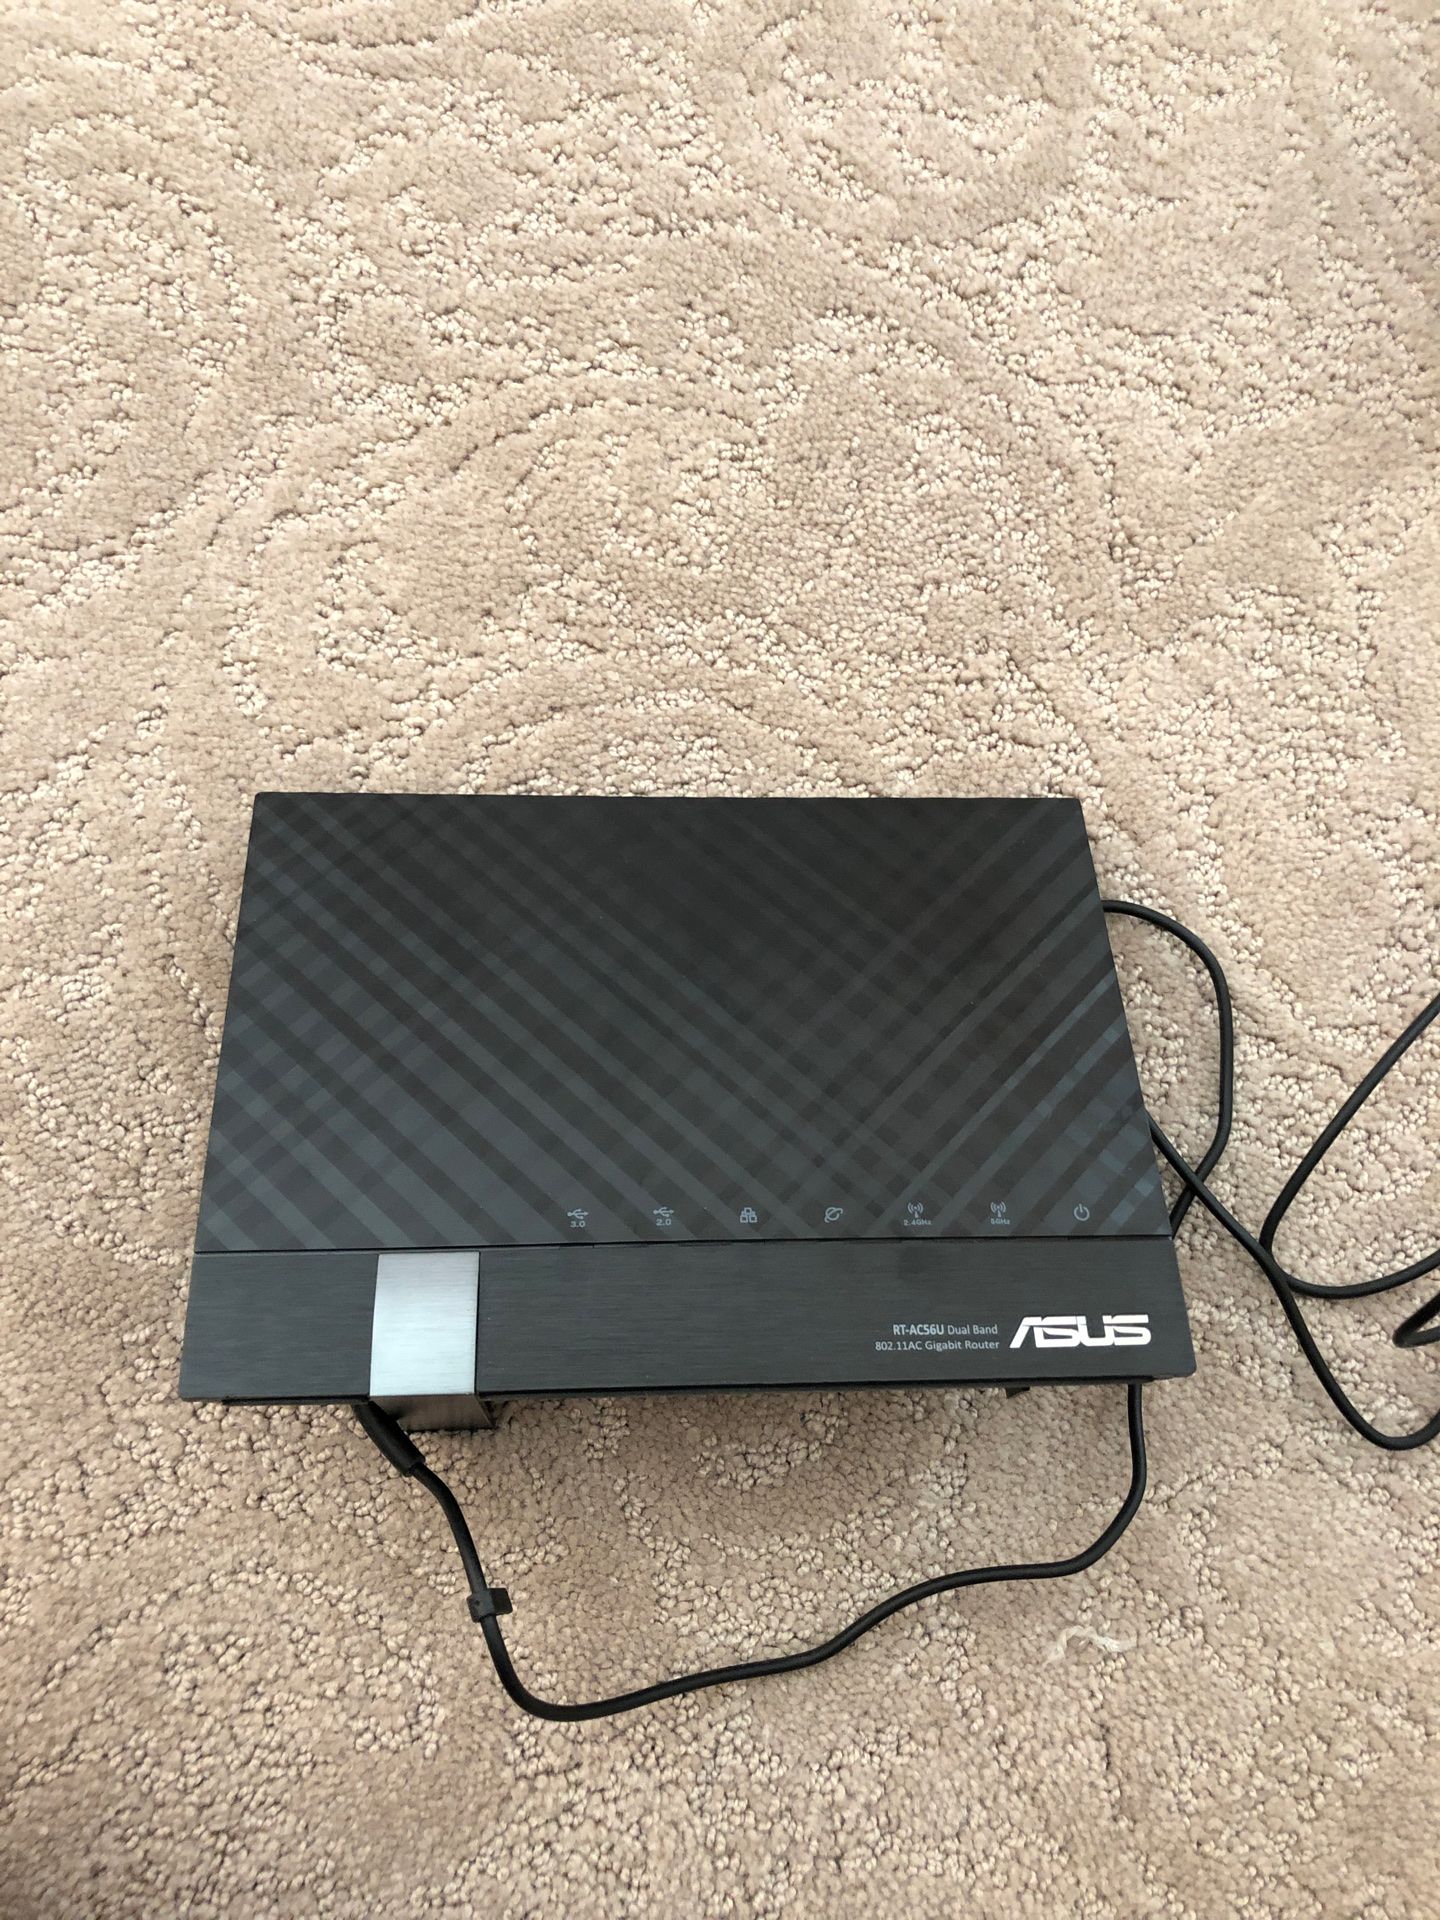 Asus router and firewall